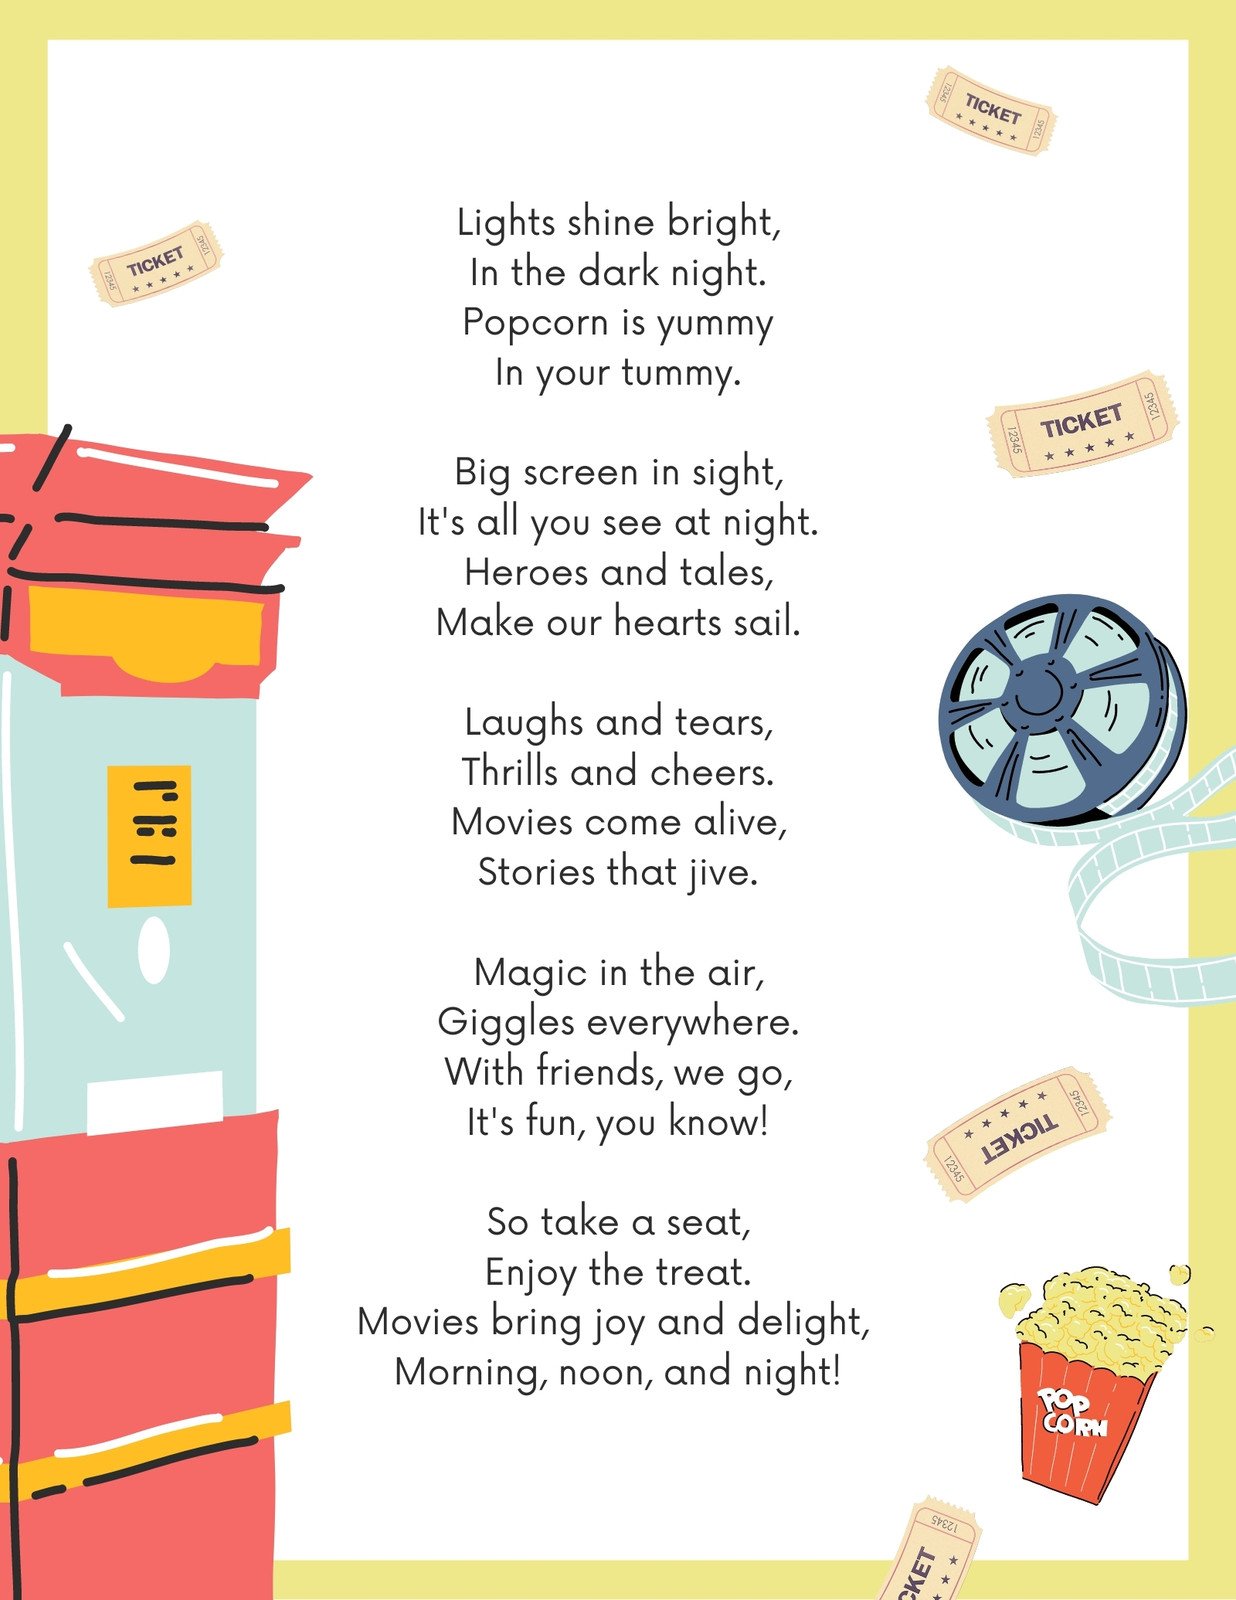 Understanding Poetry Worksheet in a Yellow and Greyscale Illustrated Style